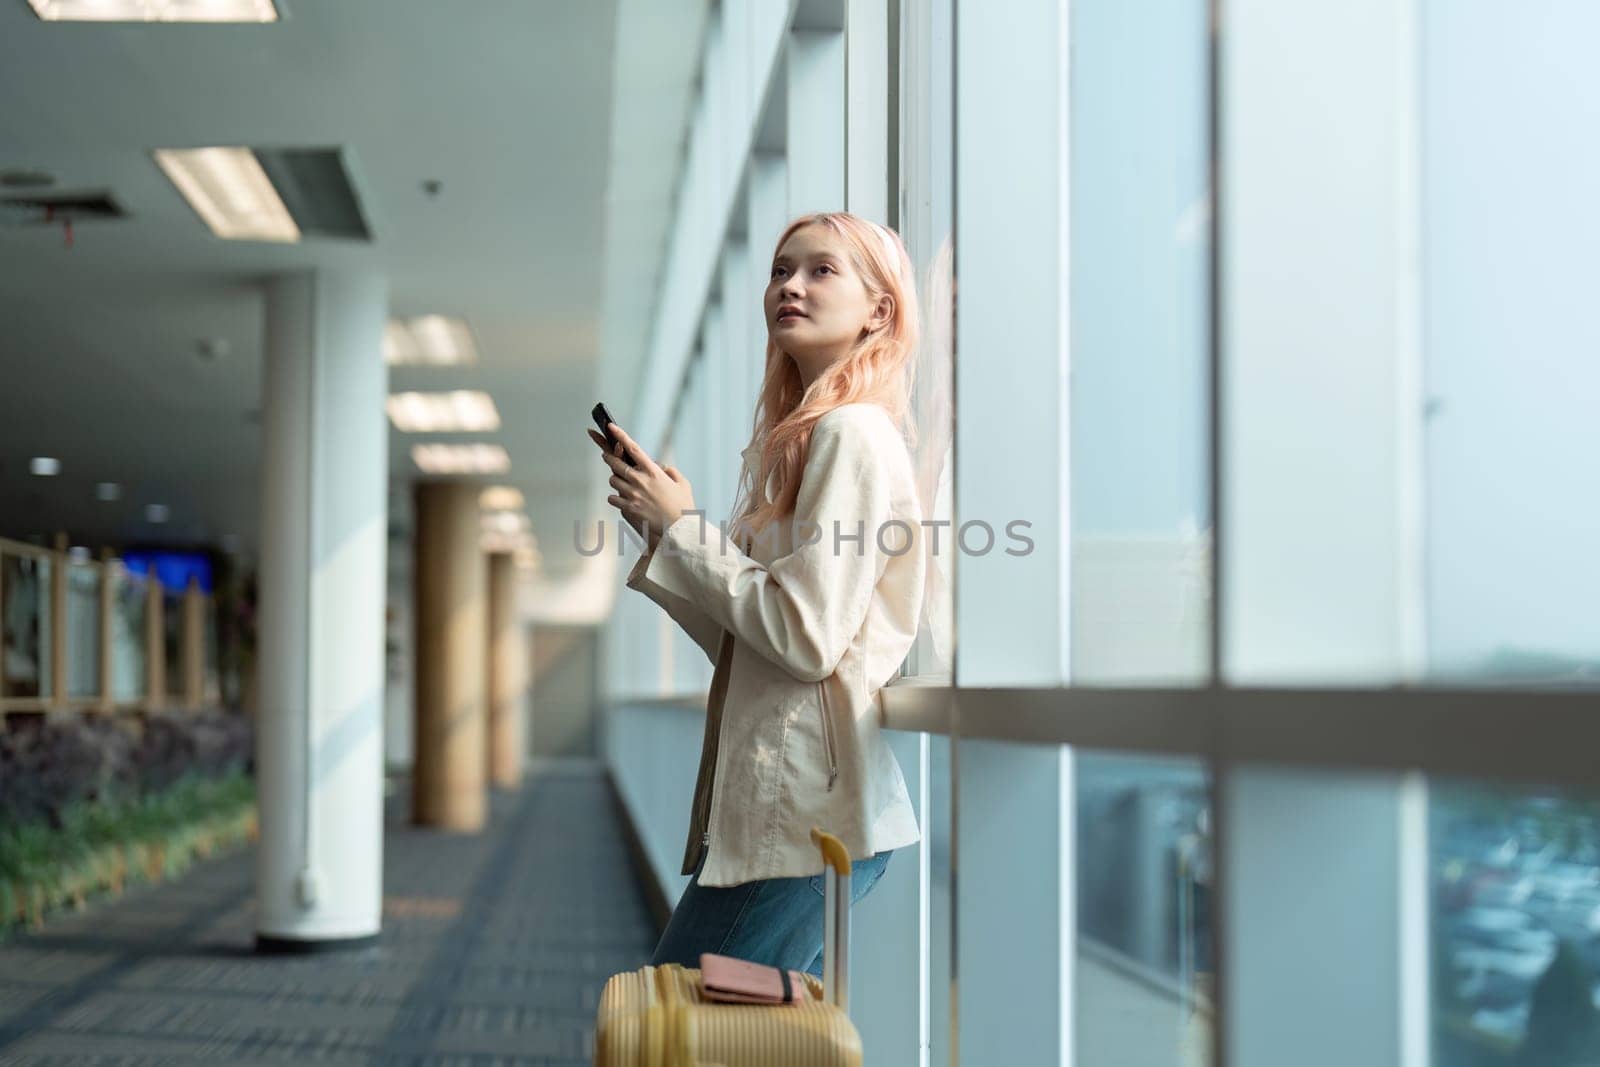 Young woman with suitcase using smartphone at airport terminal. Modern travel concept, casual outfit, waiting for flight.